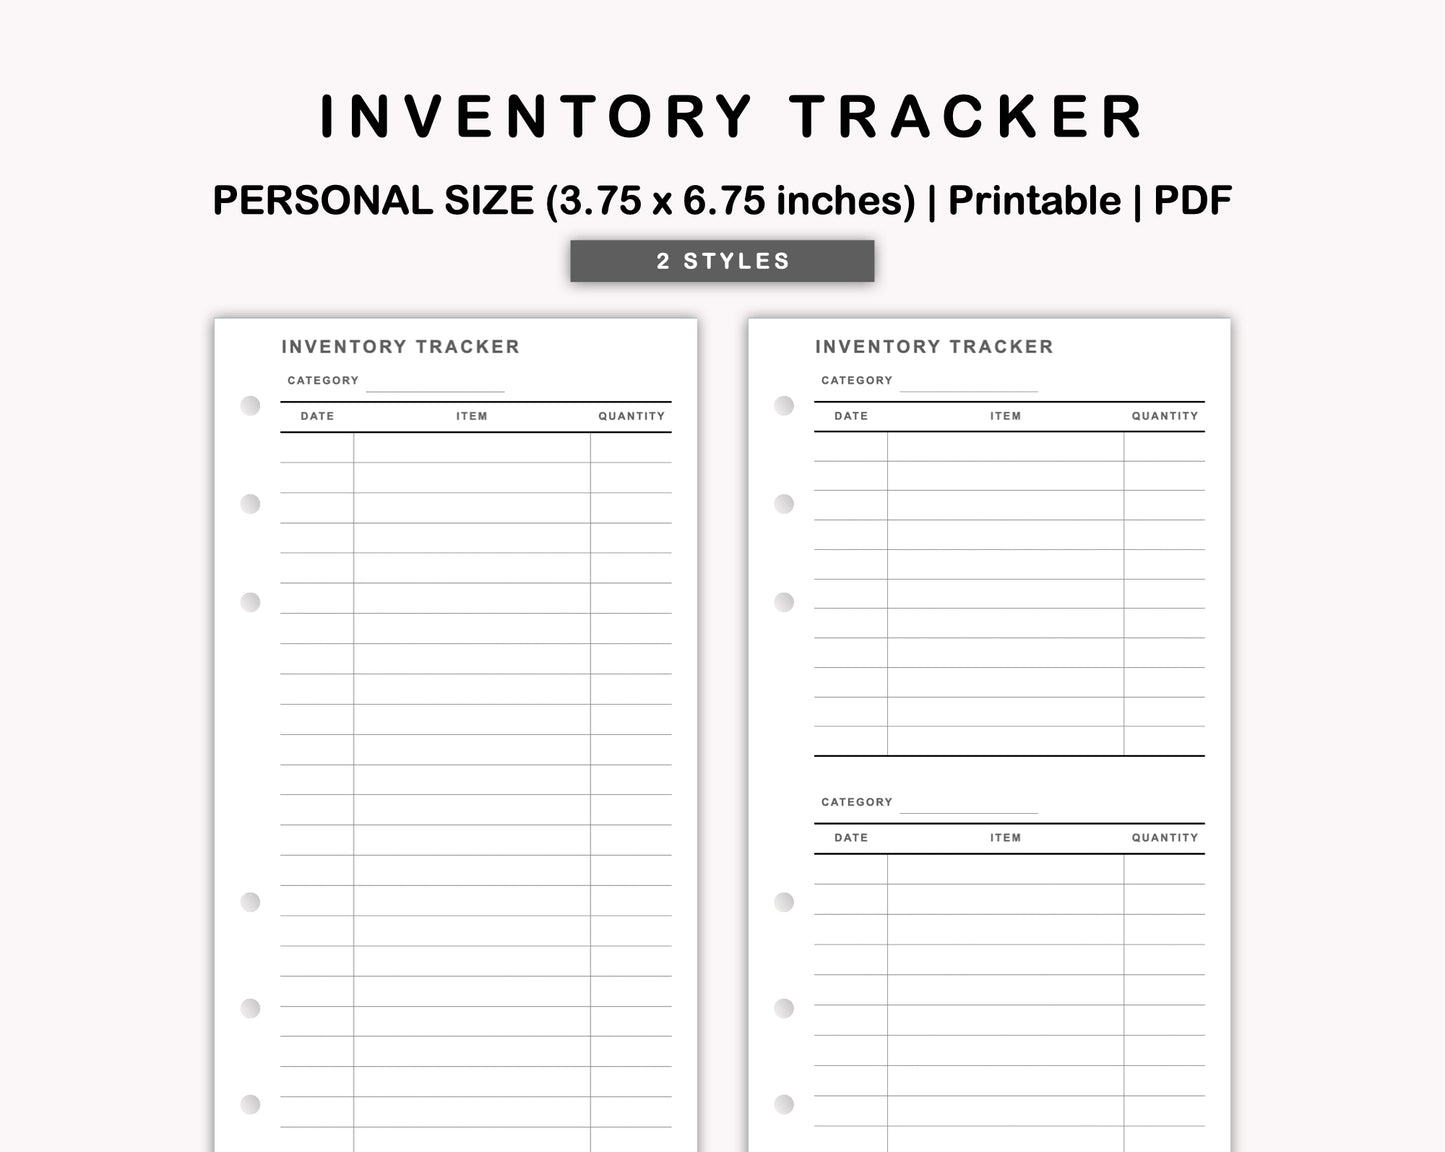 Personal Inserts - Inventory Tracker